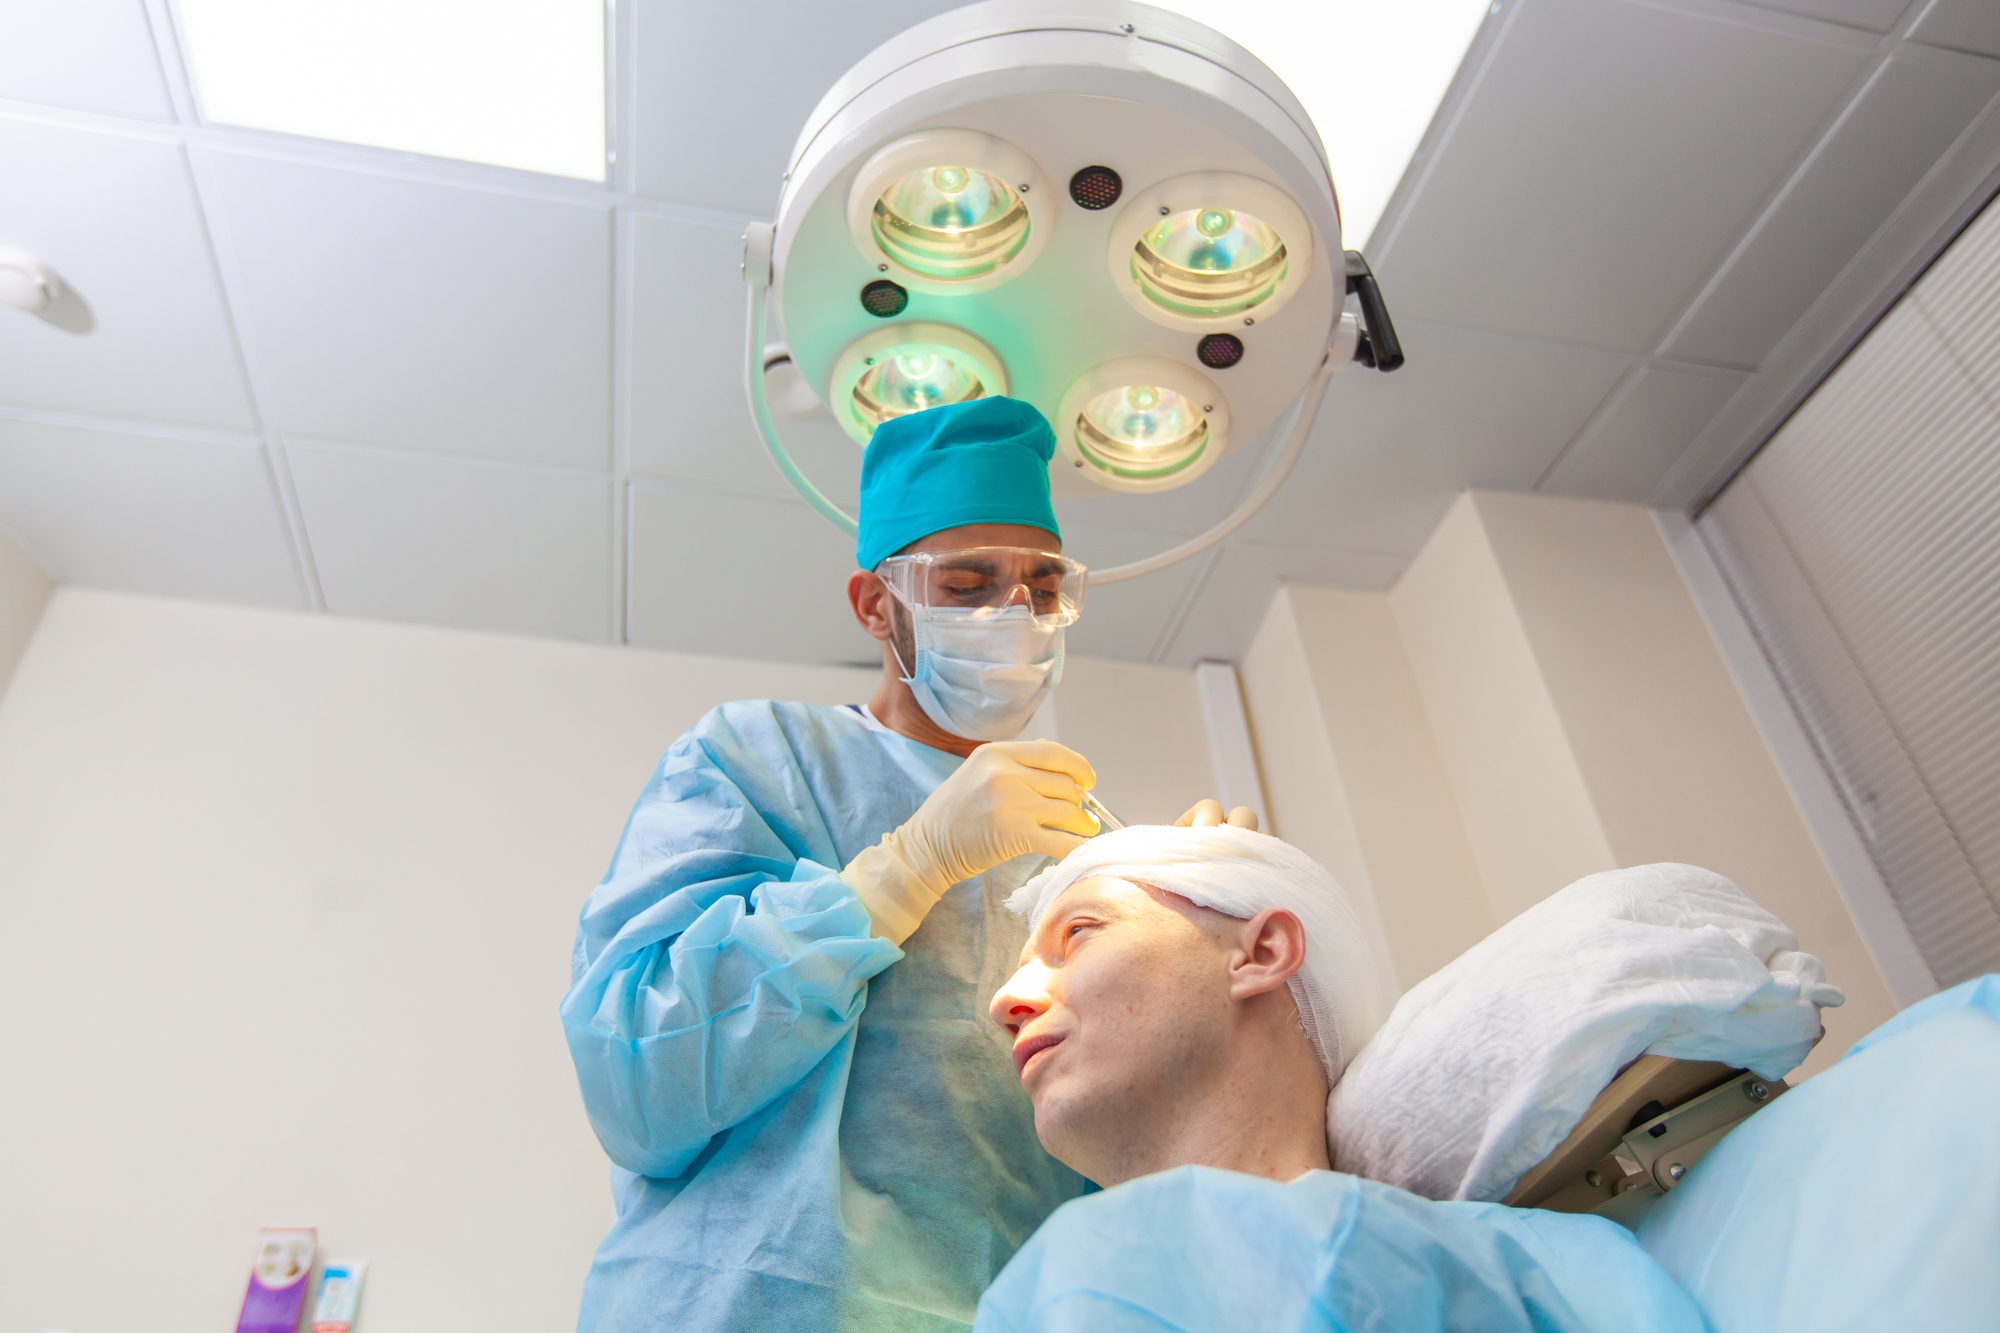 The surgeon gives injections to the head. Baldness treatment. Hair transplant. Surgeons in the operating room carry out hair transplant surgery. Surgical technique that moves hair follicles from a part of the head.